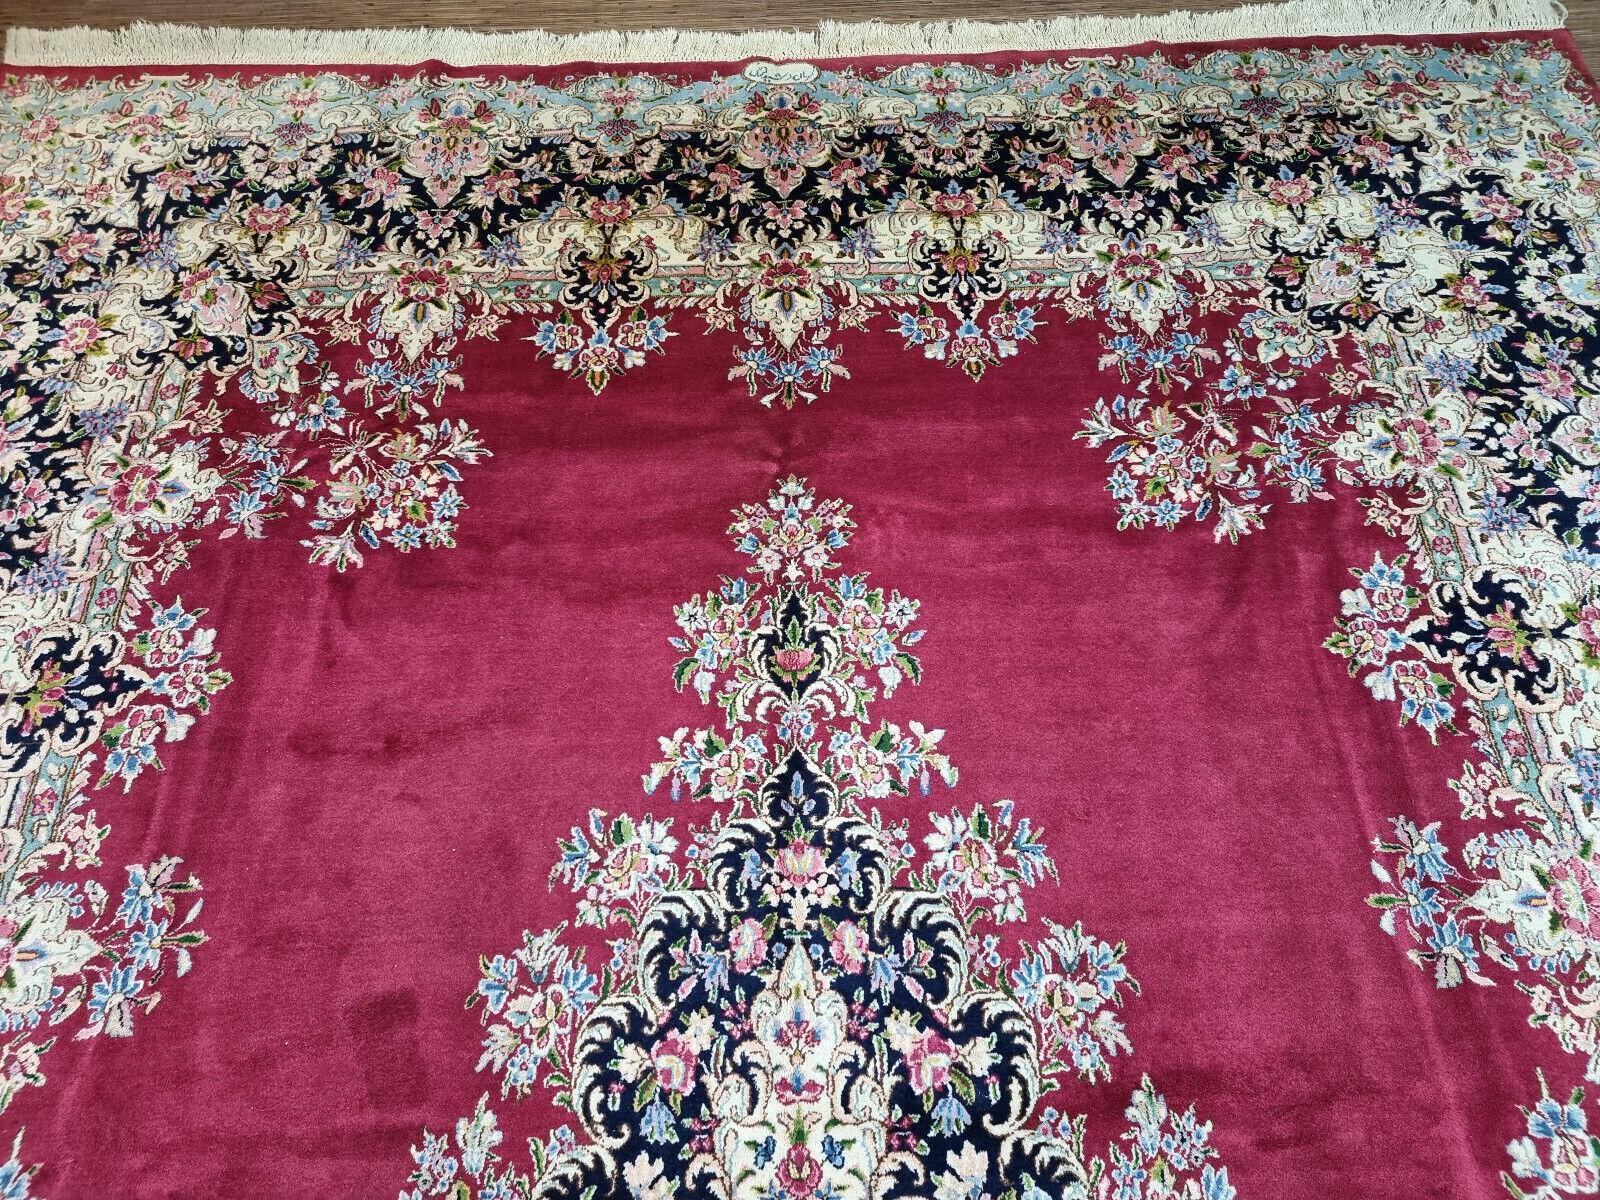 Late 20th Century Handmade Vintage Persian Style Kerman Rug 10.1' x 13.1', 1970s - 1D73 For Sale